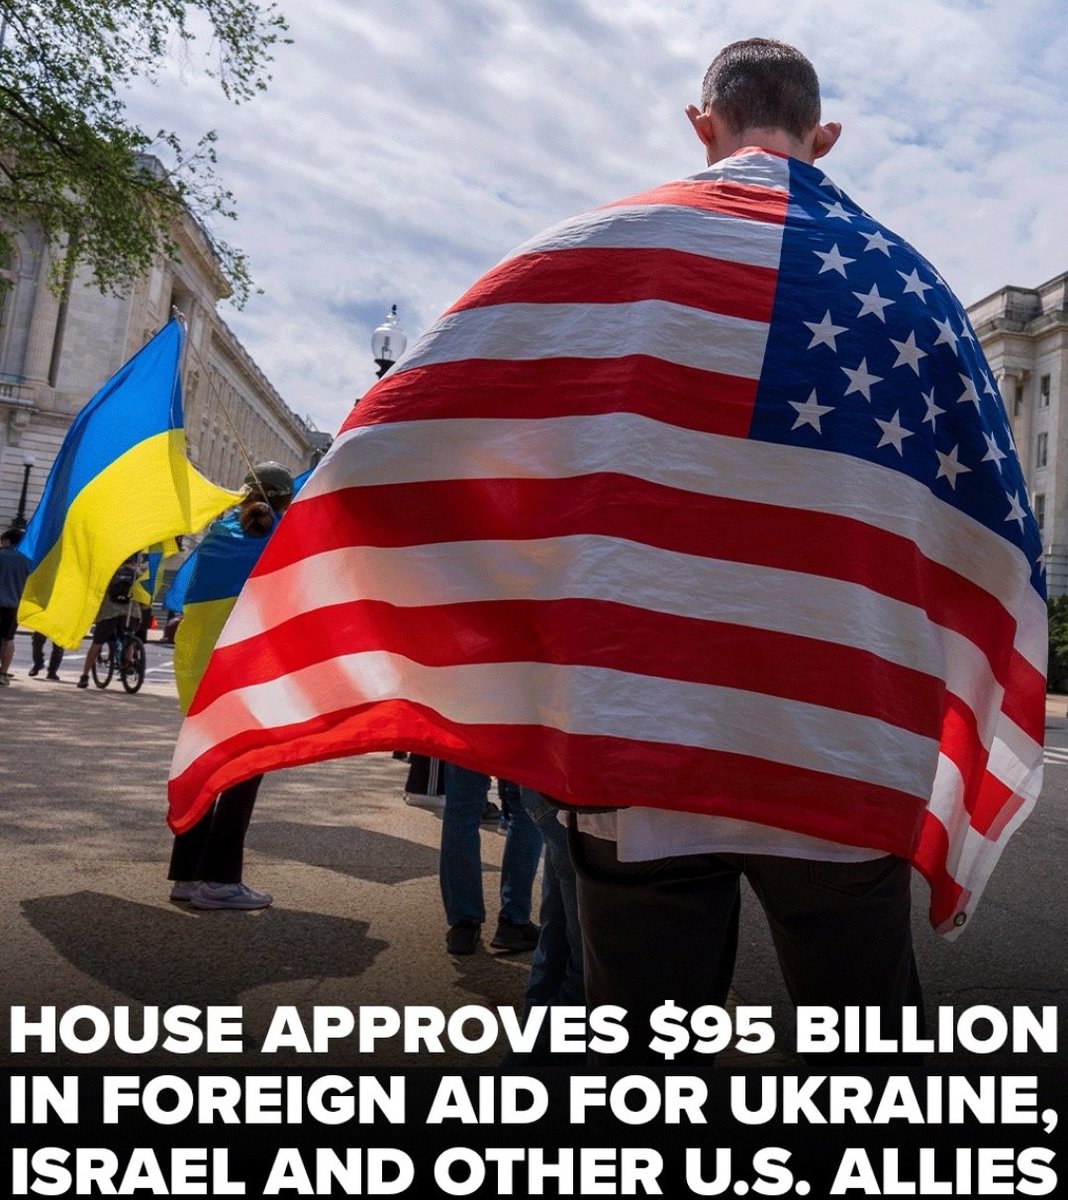 🚨 The House passed a series of foreign aid bills that include $60.8 billion in aid to Ukraine, $26.38 billion in aid to Israel, $8 billion in aid to the Indo-Pacific region, including Taiwan, and a foreign aid bill that includes a TikTok ban provision.

Yep, you read that